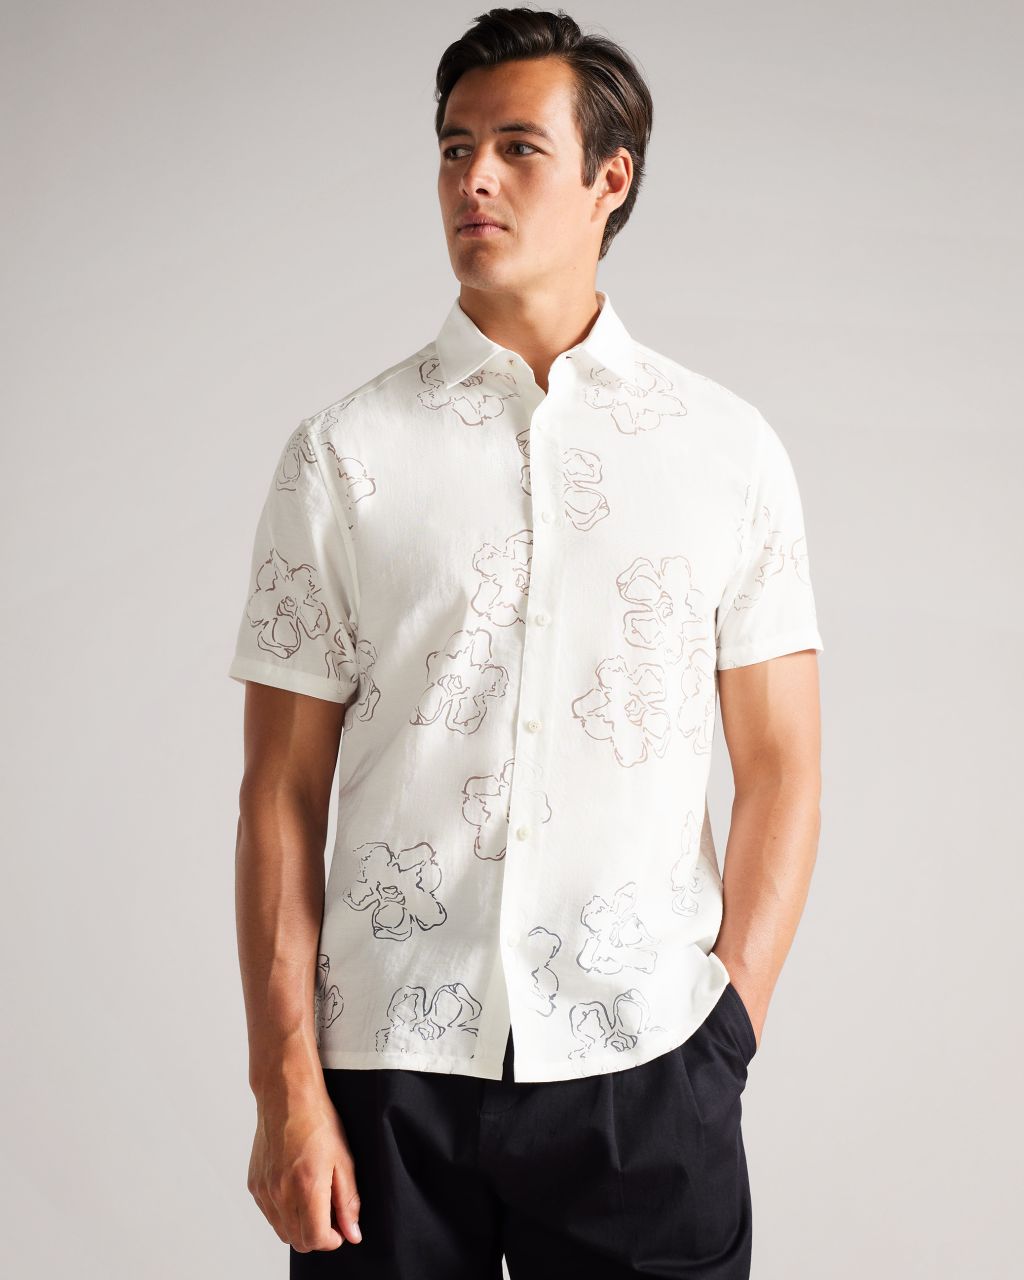 Ted Baker Men's Short Sleeve Floral Burn Out Shirt in White, Guilio